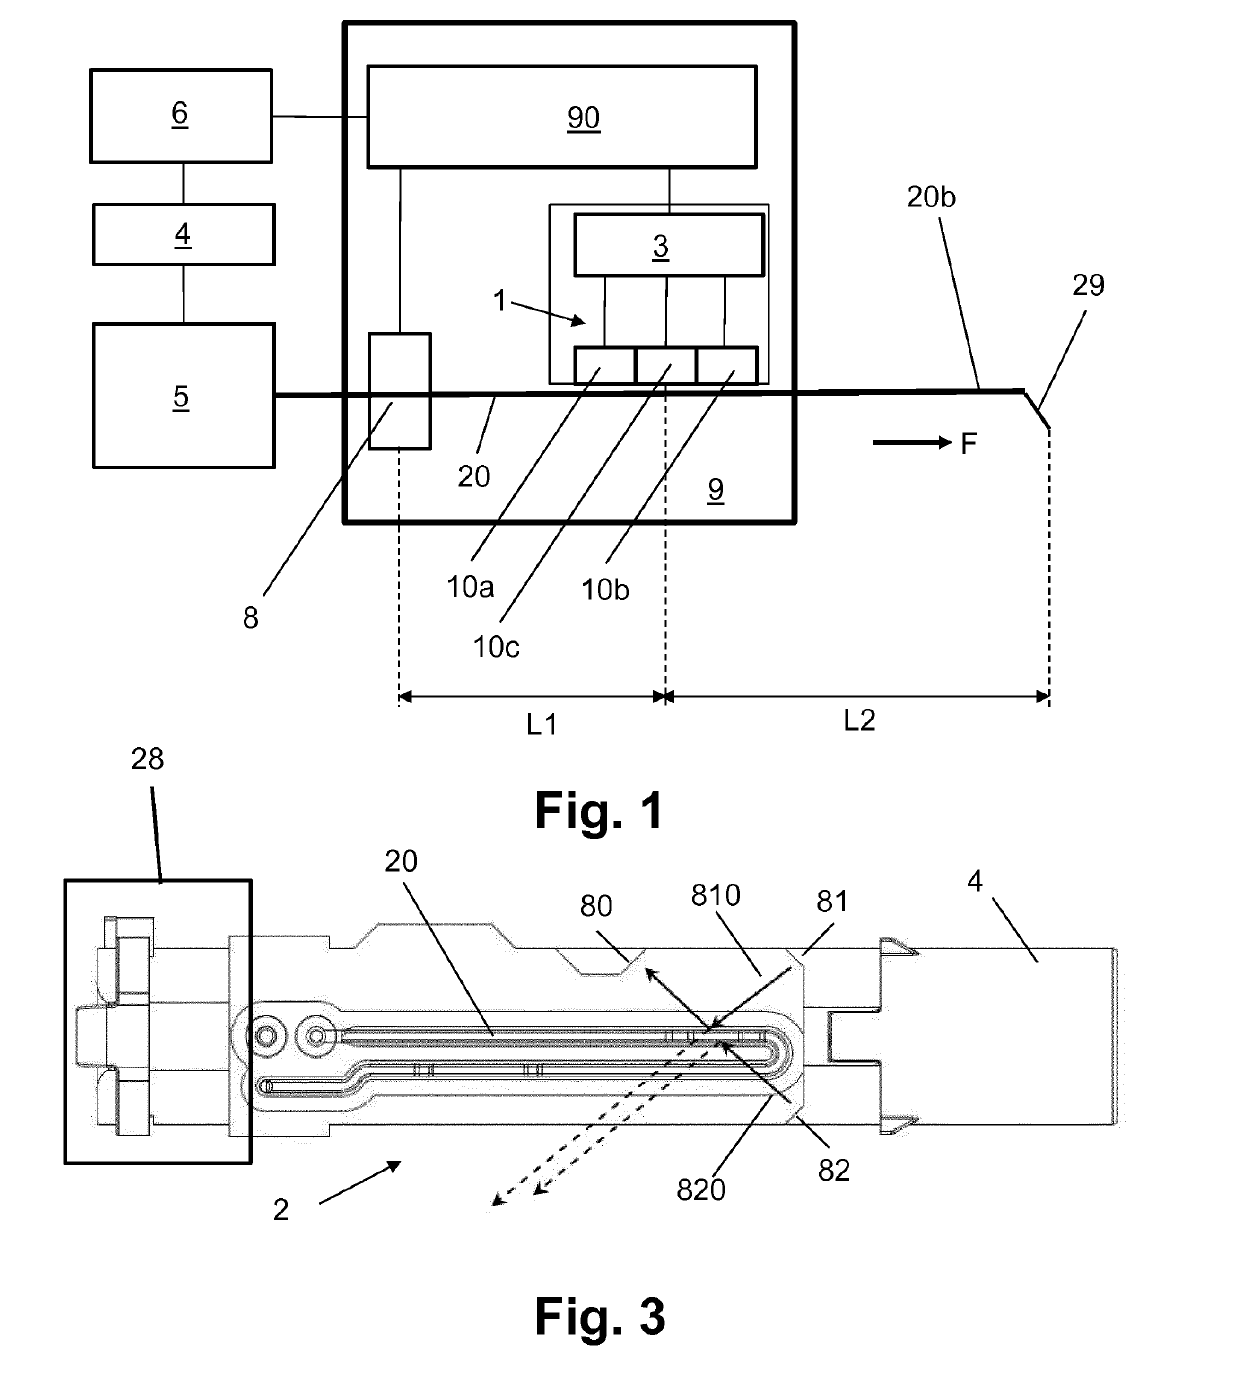 Supervision device for ambulatory infusion